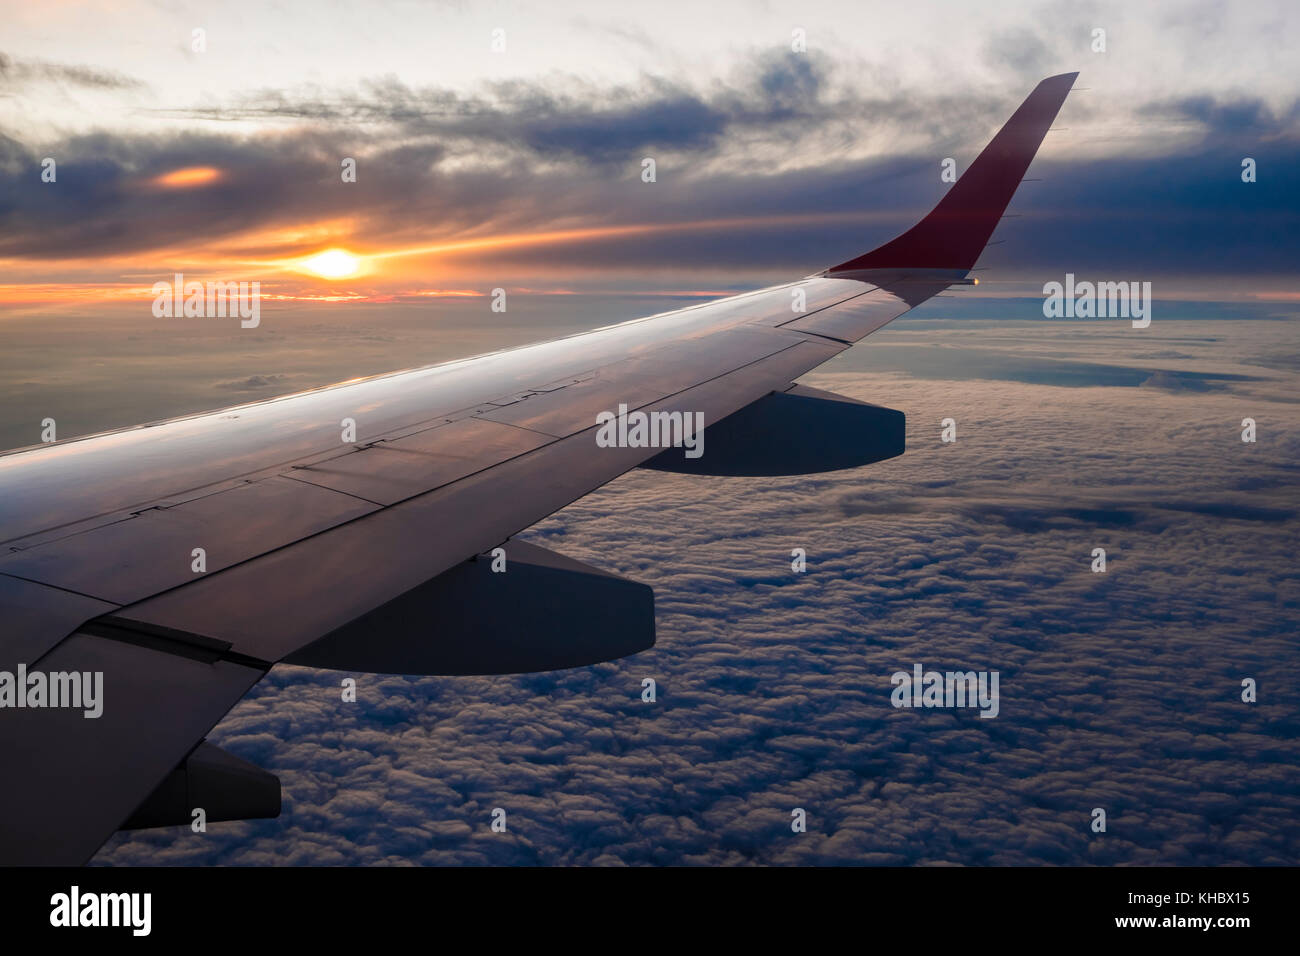 Wing of the airplane, flight over cloud cover, sunset Stock Photo